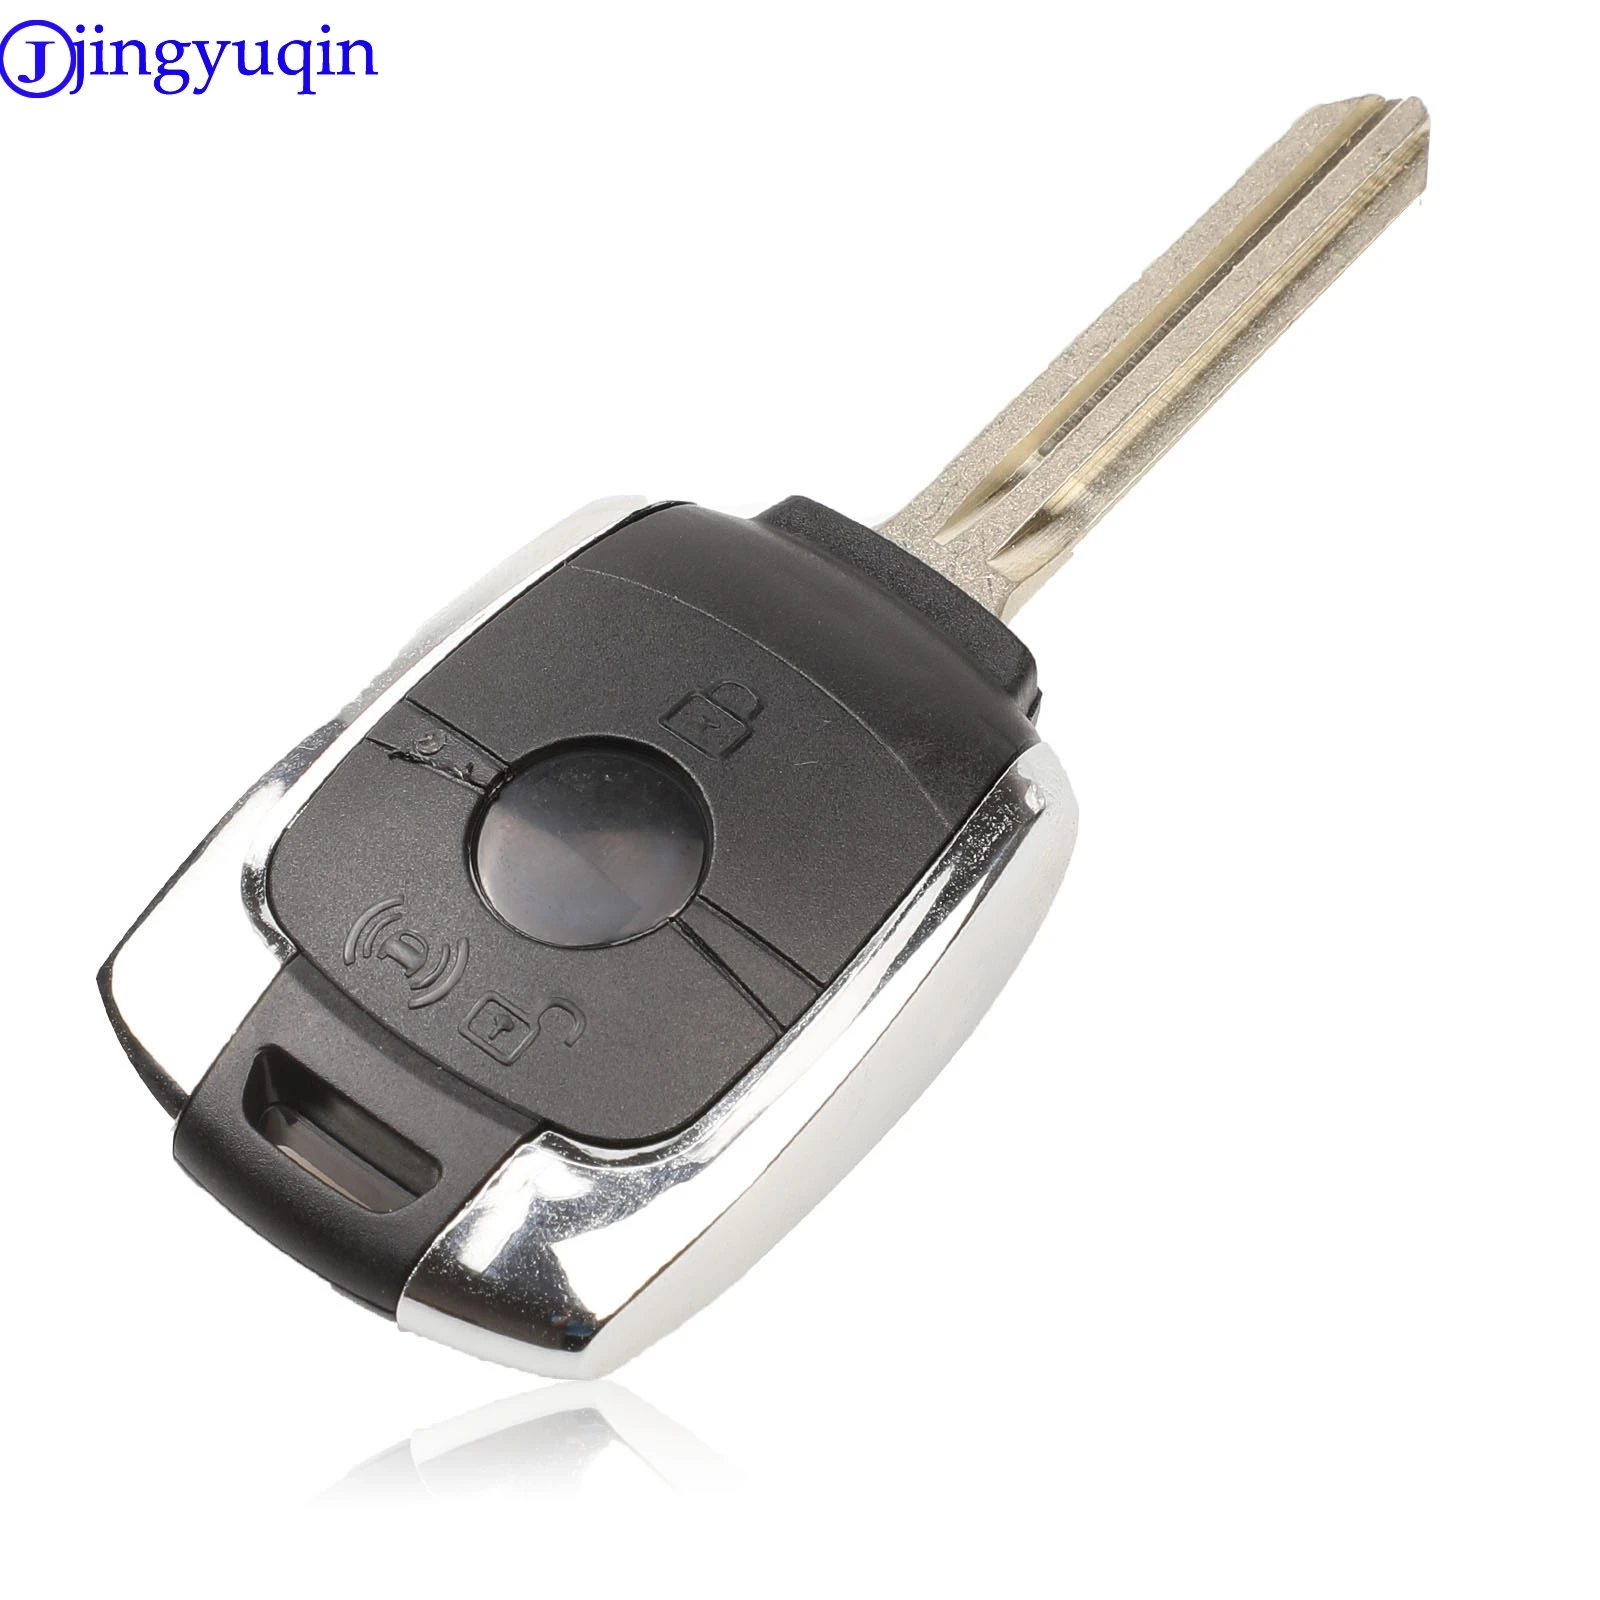 jingyuqin 2 Buttons Replacement Remote Key Shell Case Fob For SsangYong Actyon Kyron Rexton Korando With Uncut Blade car keys